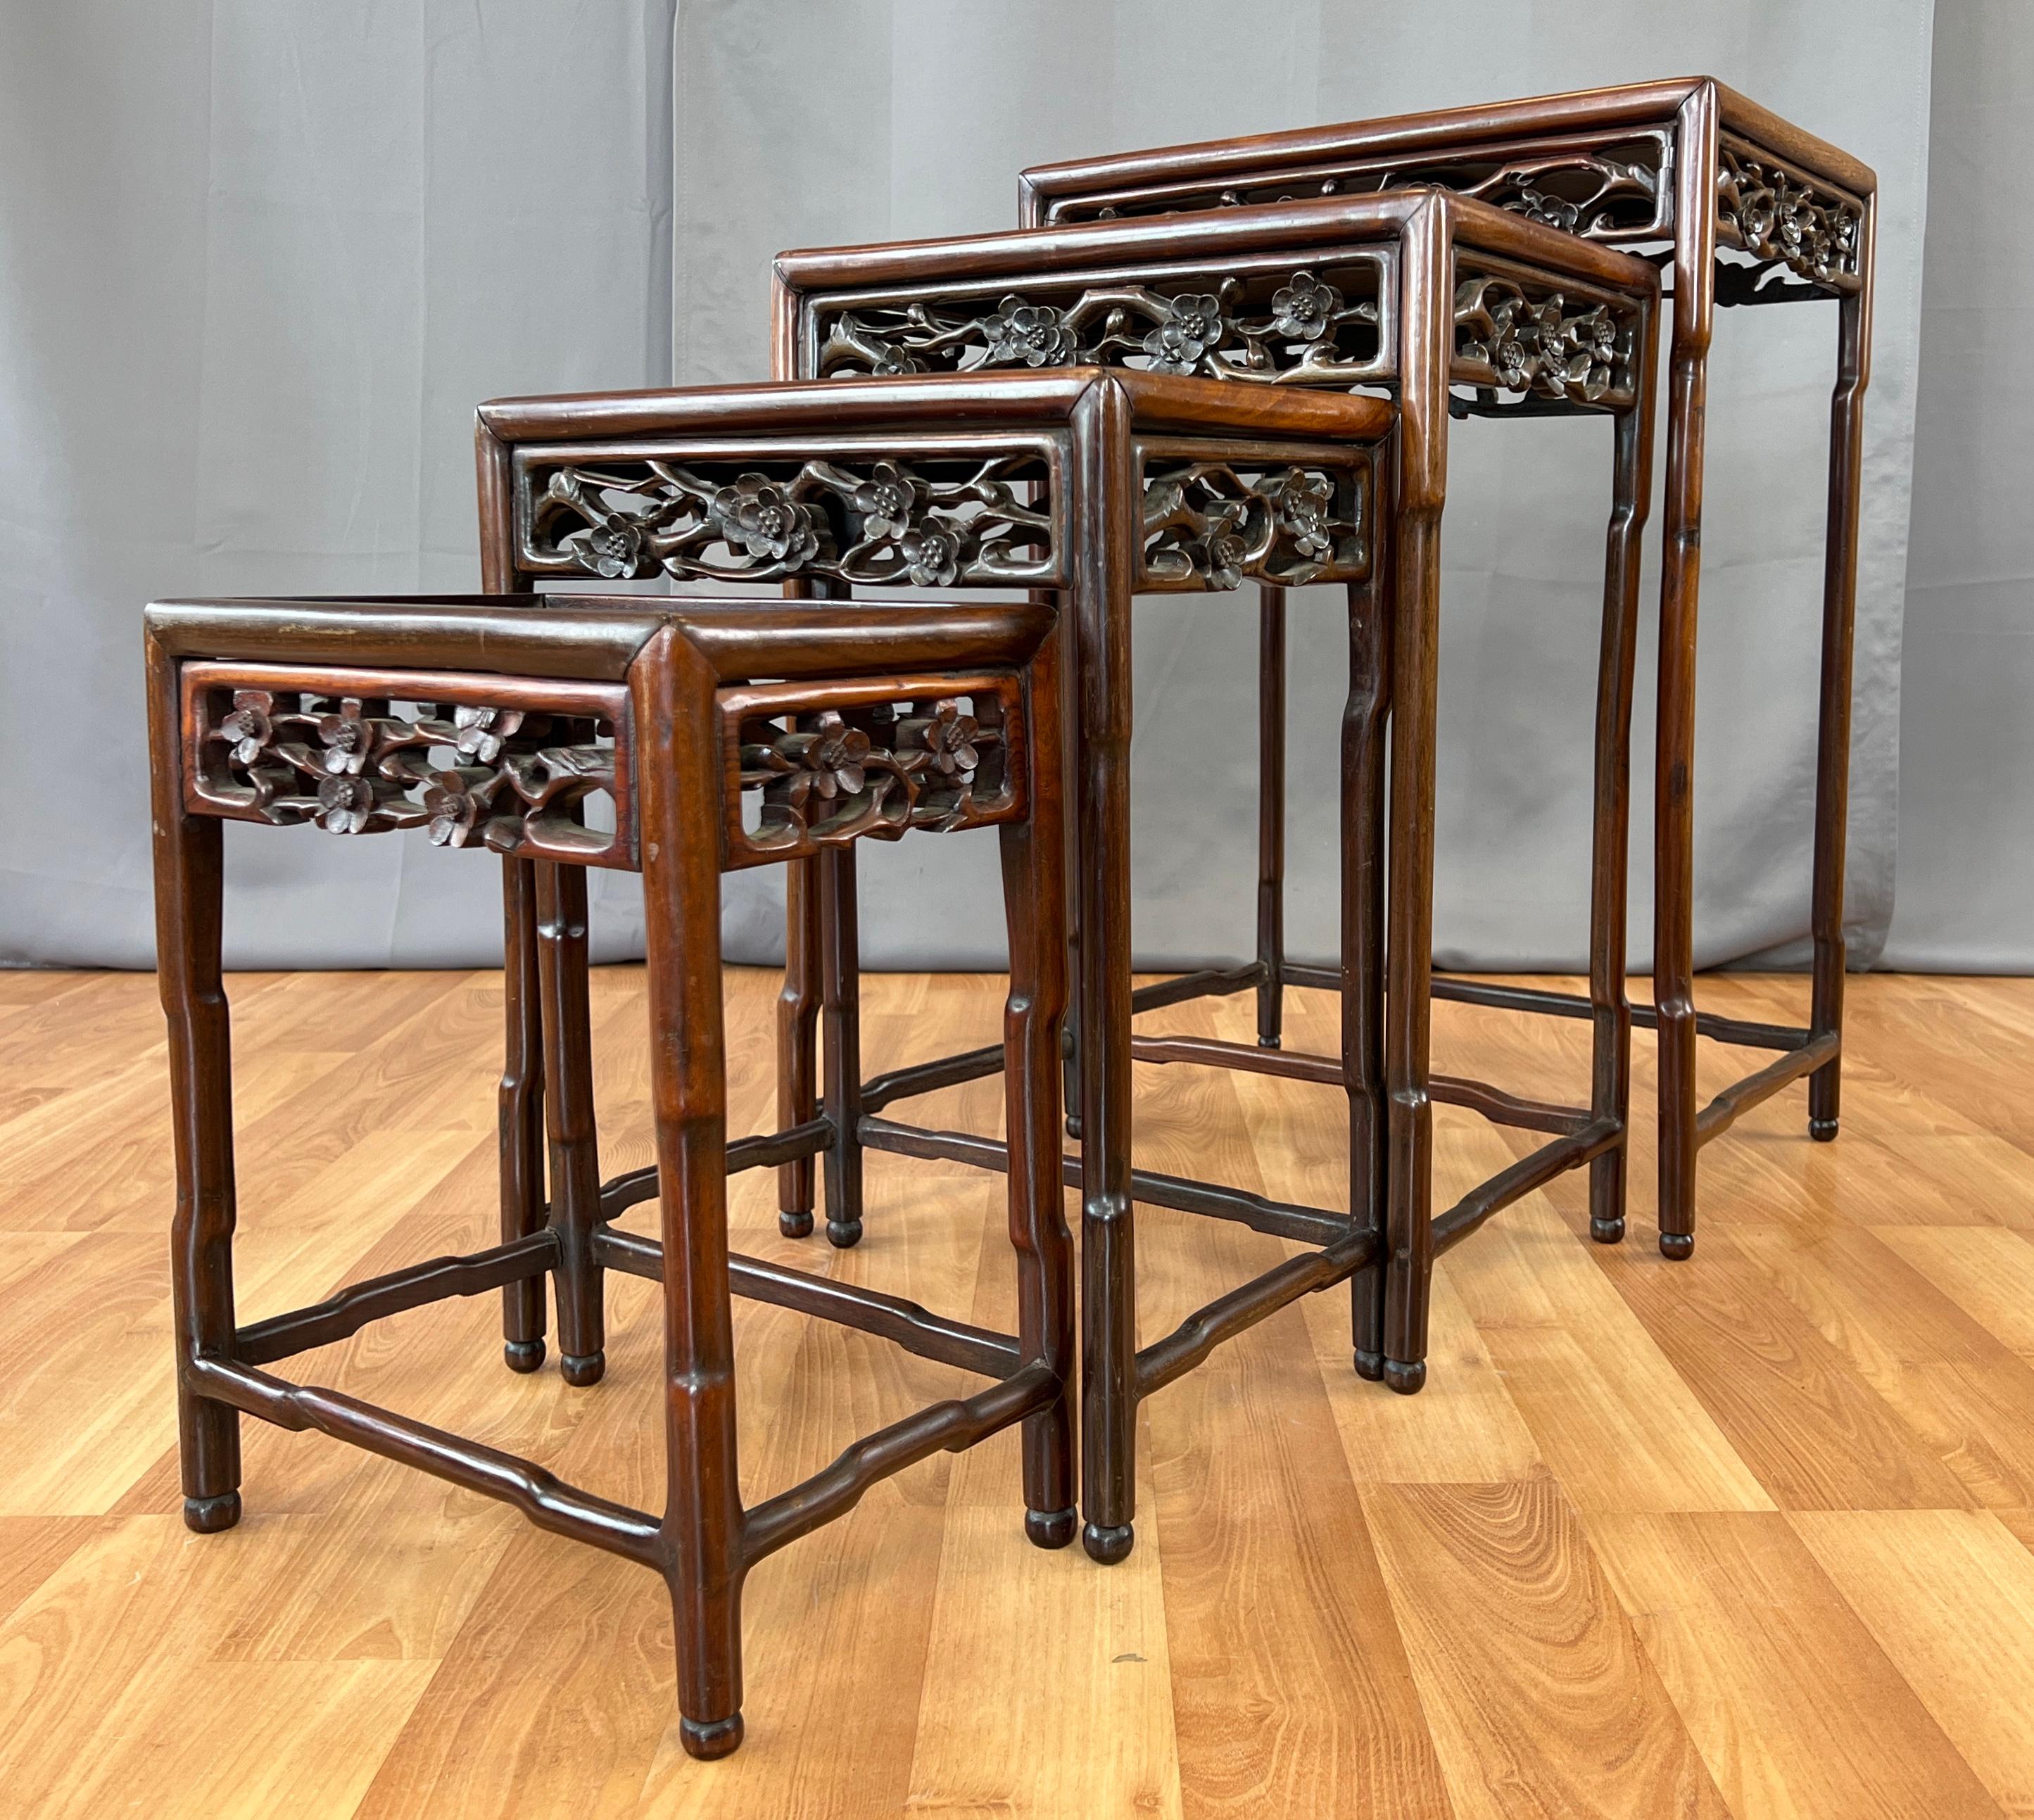 Offered here is a set of four circa late 19th century or early 20th century Chinese nesting tables made out of Zitan wood.
Carved and shaped legs, and their cross bars also, rise up to hold the table top panel. Tables apron on their three